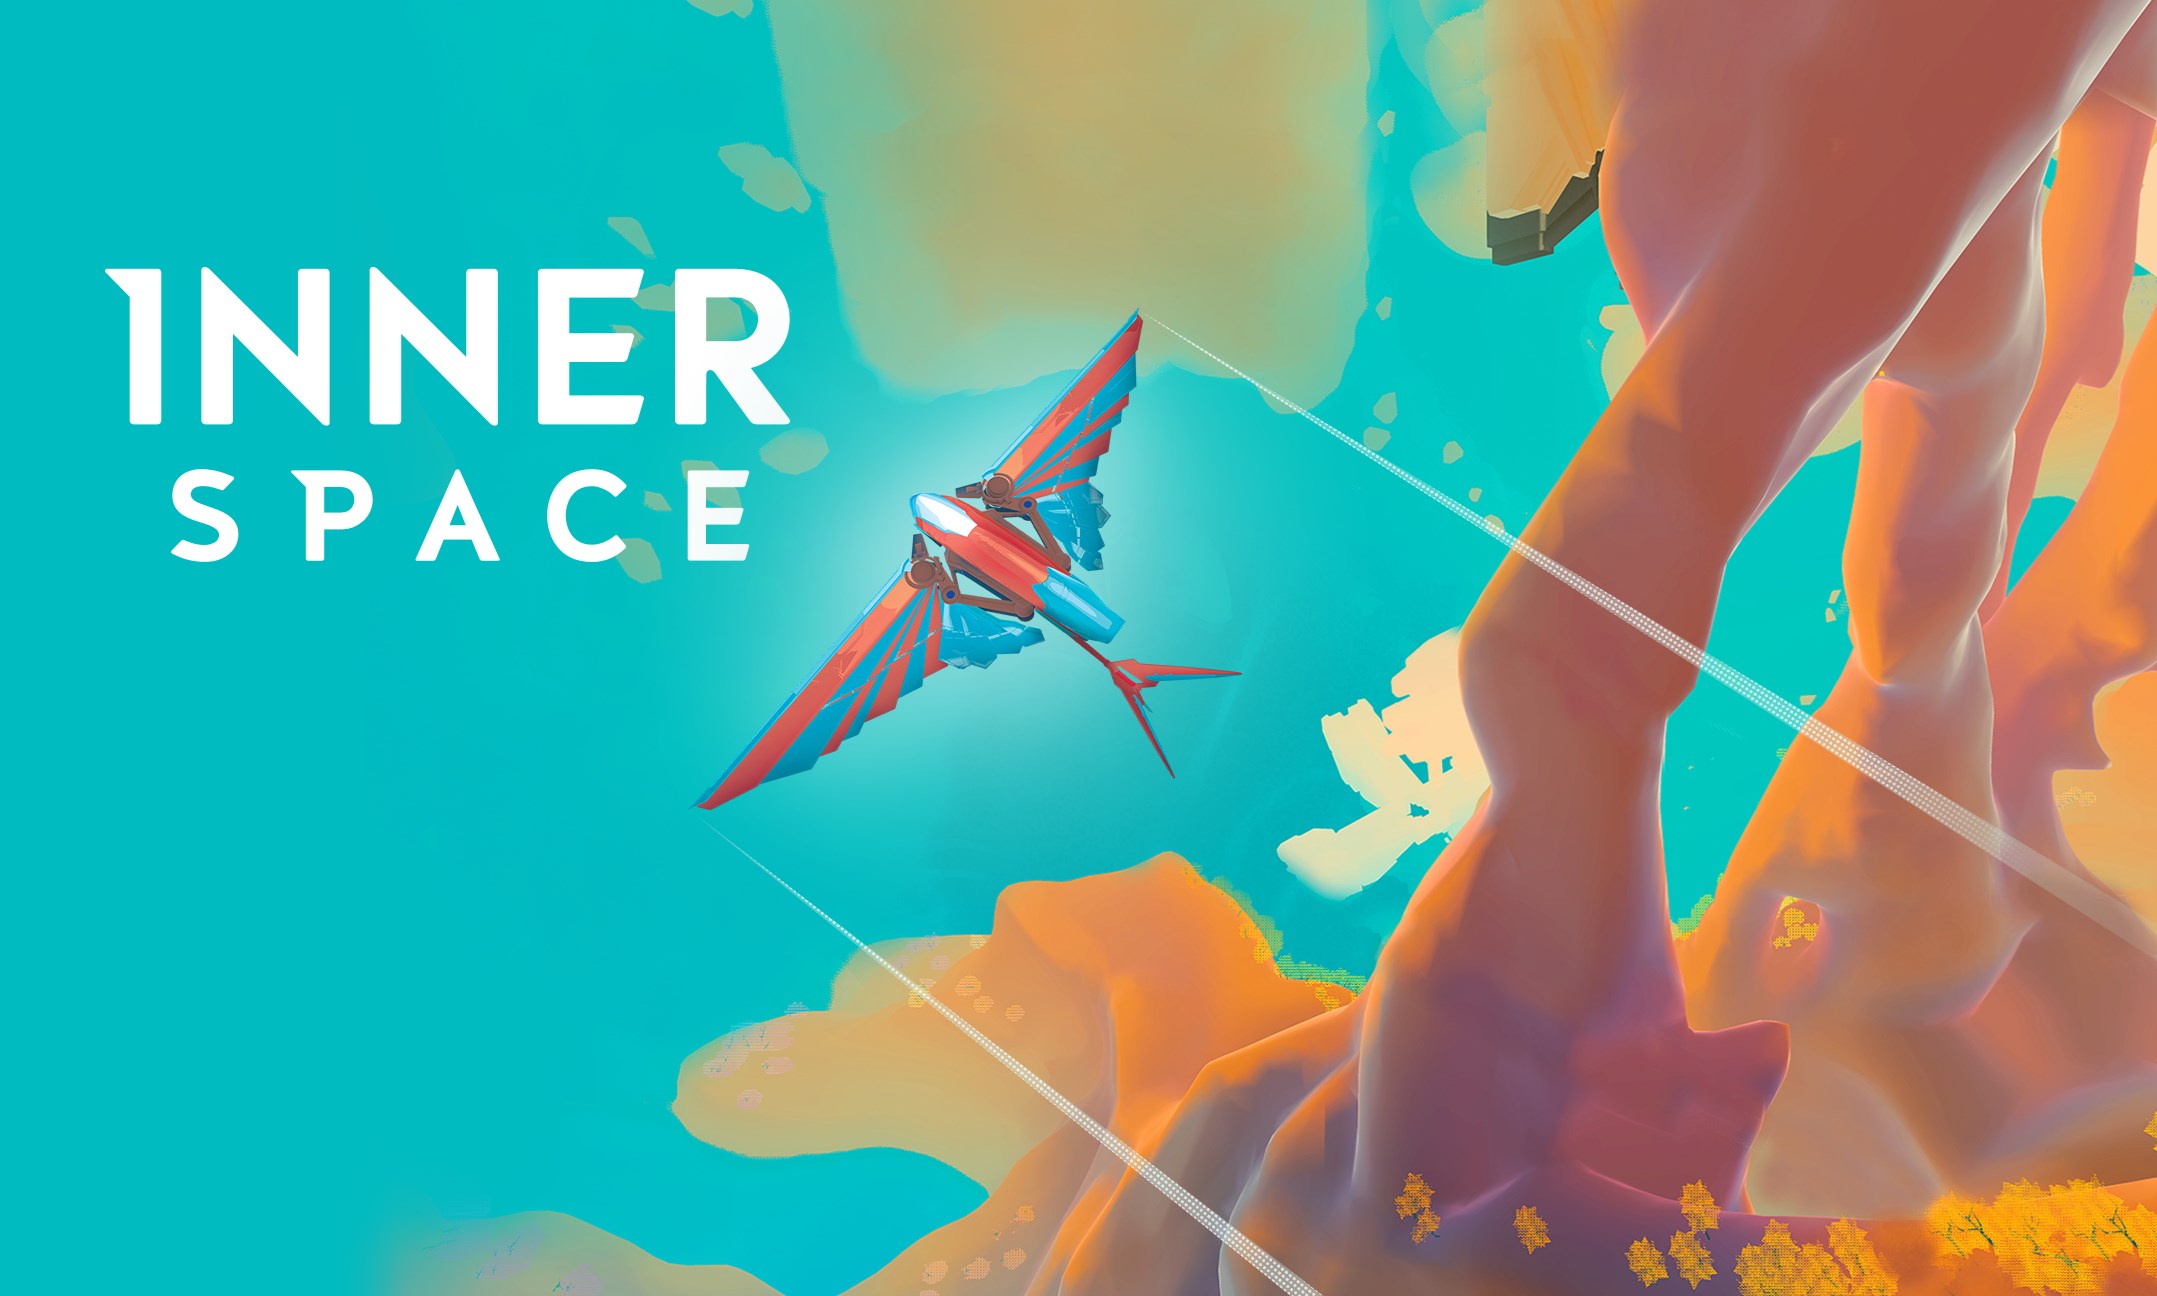 Be a fly game. Innerspace игра. Innerspace геймплей. Innerspace обложка. Flight медитативная игра.